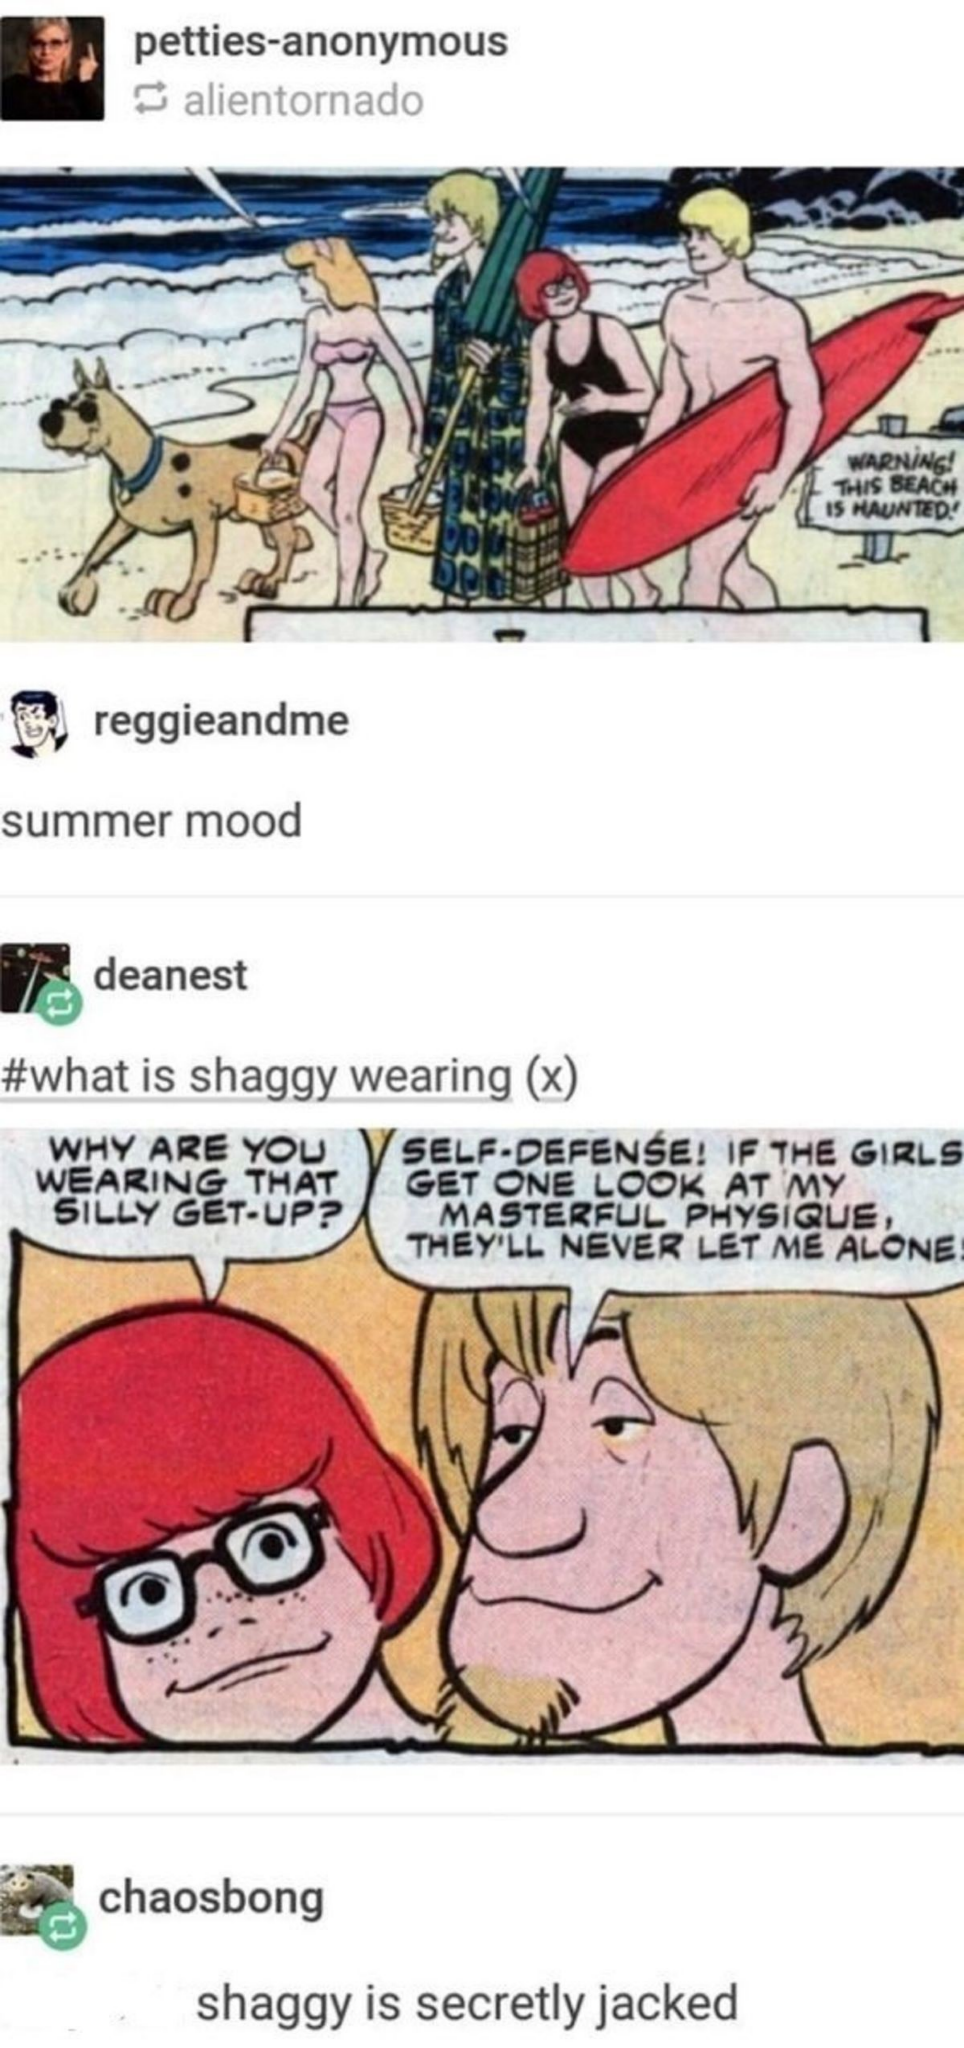 shaggy beach meme - pettiesanonymous allentomado y reggieandme summer mood deanest is shaggy wearing X Why Are You V Self.Defenseif The Girls Wearing That Get One Look At My Silly GetUp Masterful Physique They'Ll Never Let Me Alone chaosbong shaggy is sec